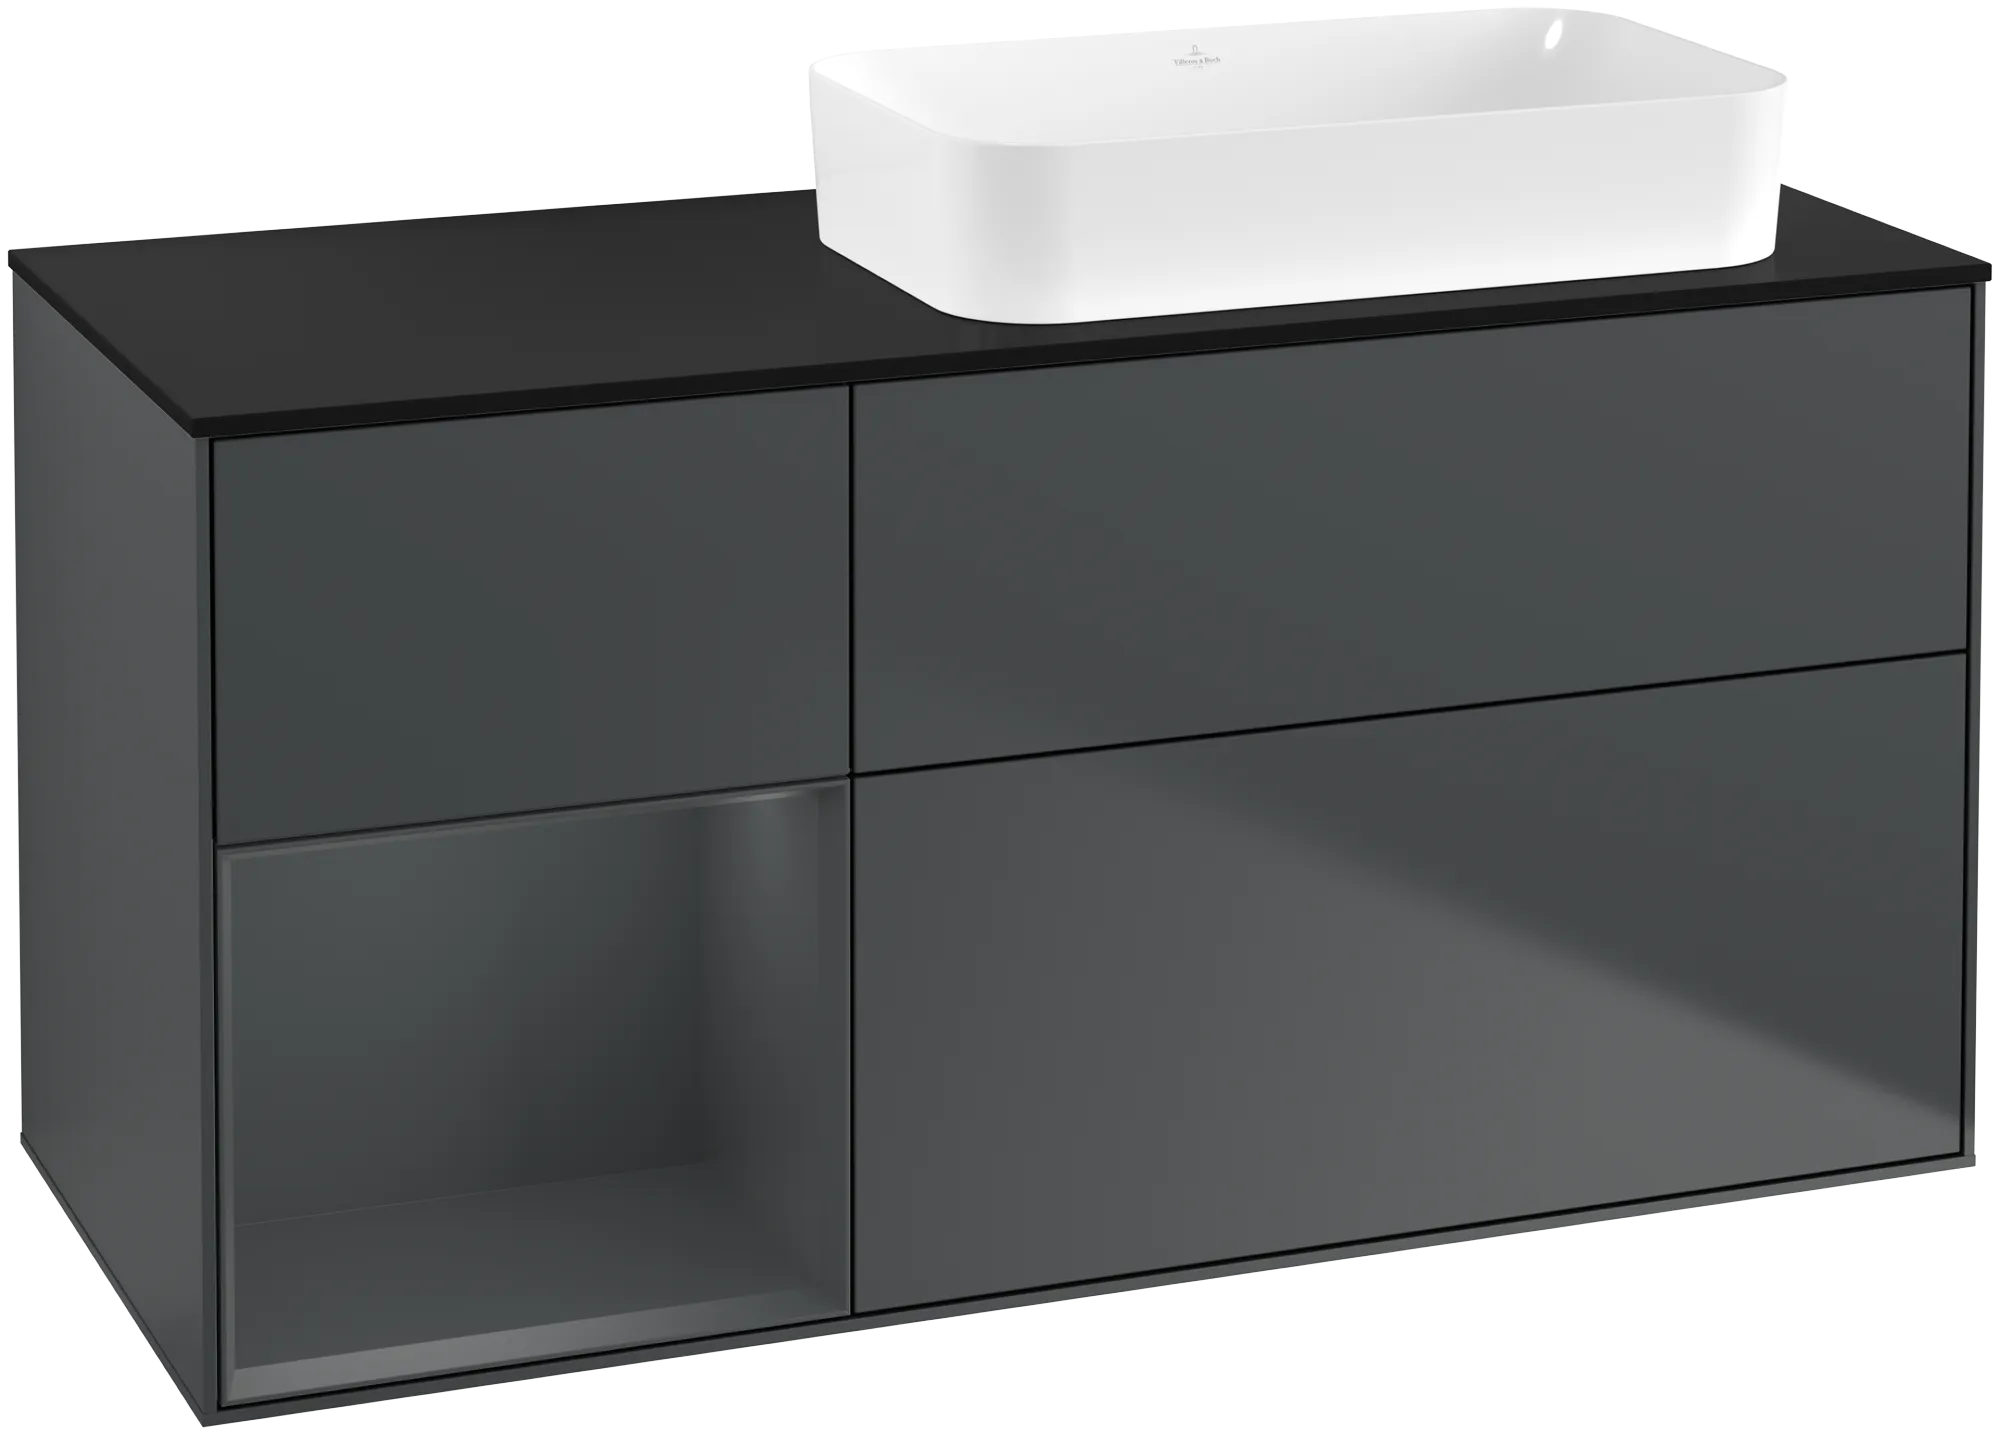 Picture of VILLEROY BOCH Finion Vanity unit, with lighting, 3 pull-out compartments, 1200 x 603 x 501 mm, Midnight Blue Matt Lacquer / Midnight Blue Matt Lacquer / Glass Black Matt #G682HGHG